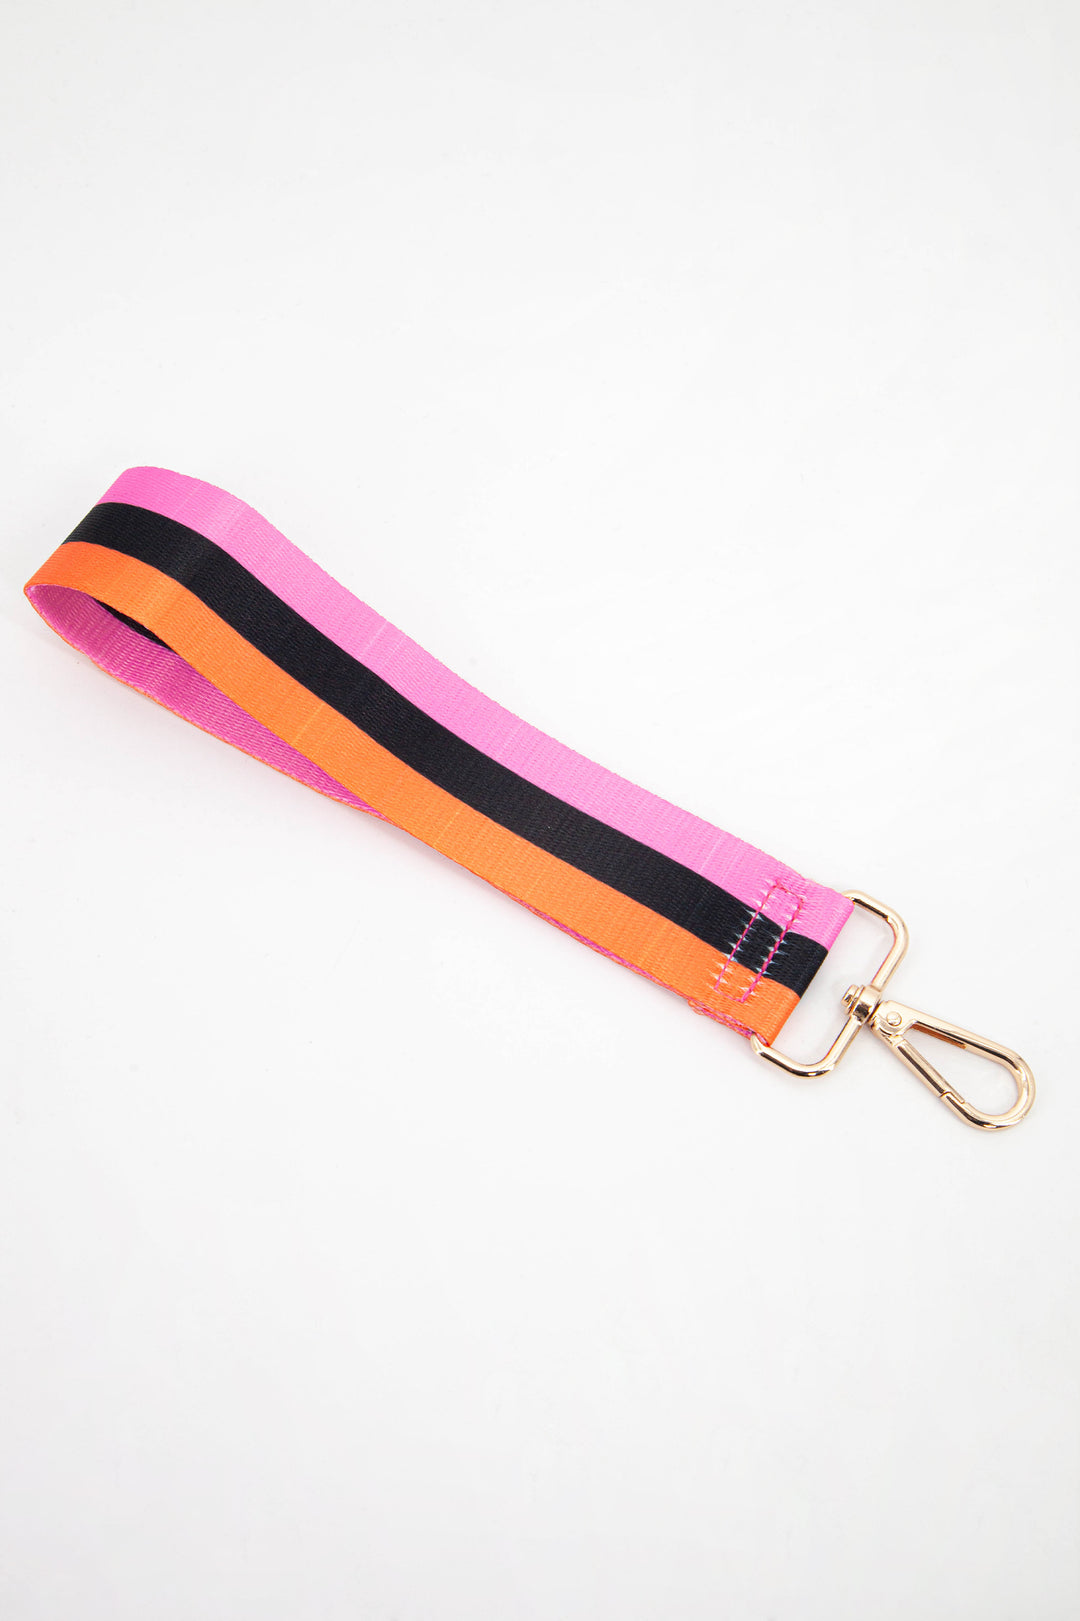 orange, black and pink striped wrist strap with gold snap hook attachment